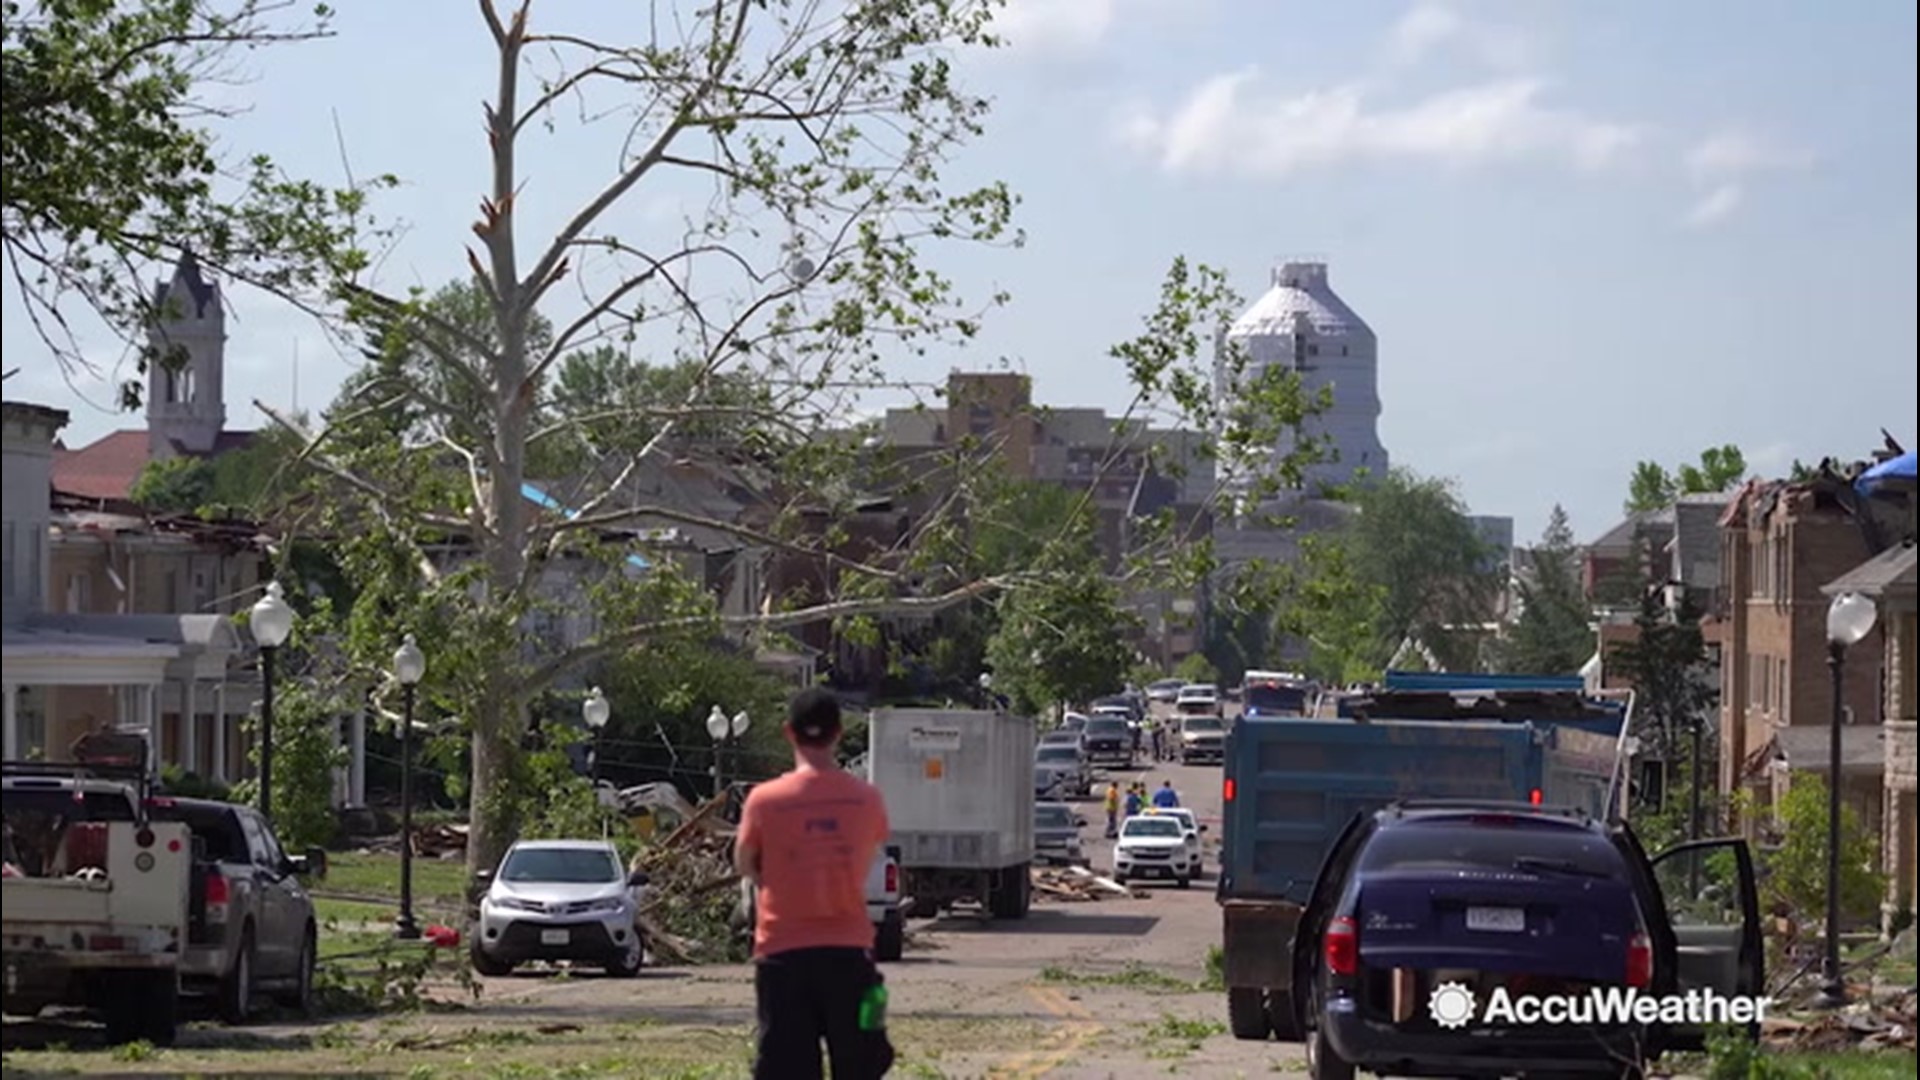 Residents of Jefferson City, Missouri are now cleaning up on May 24 after a tornado devastated the community.  Many streets are damaged and trees are also down in a lot of areas.